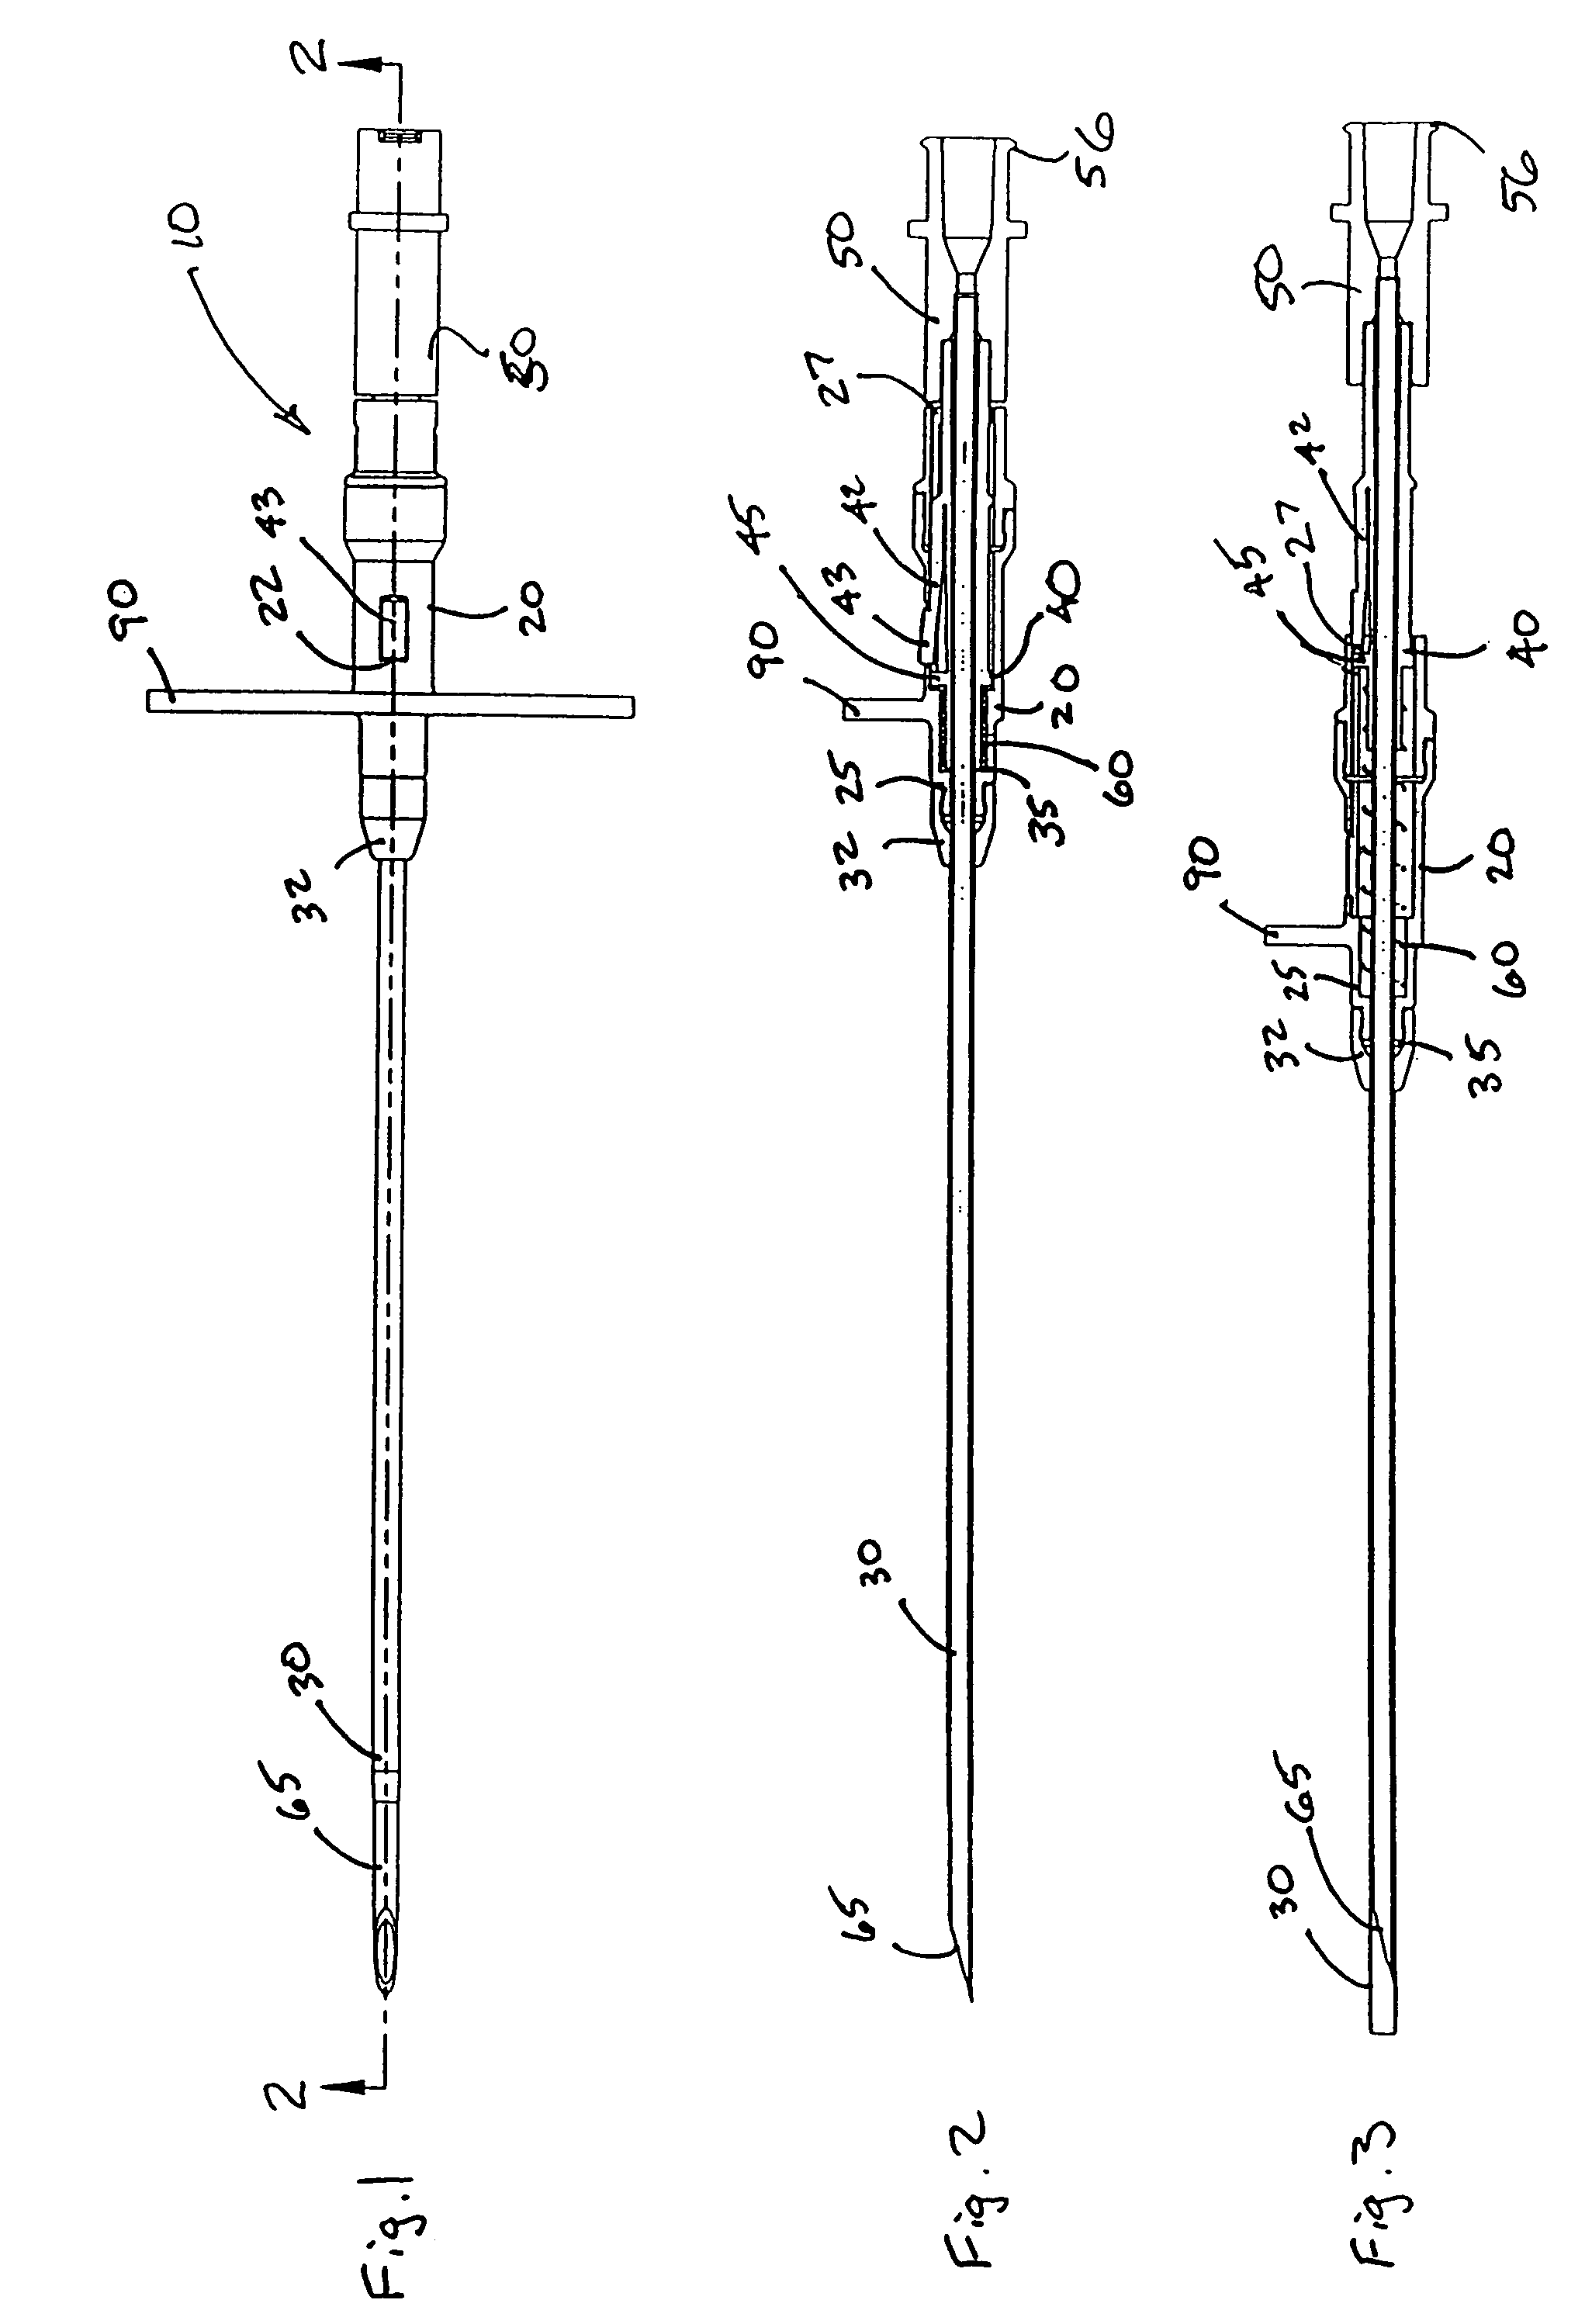 Medical device with shield having a retractable needle